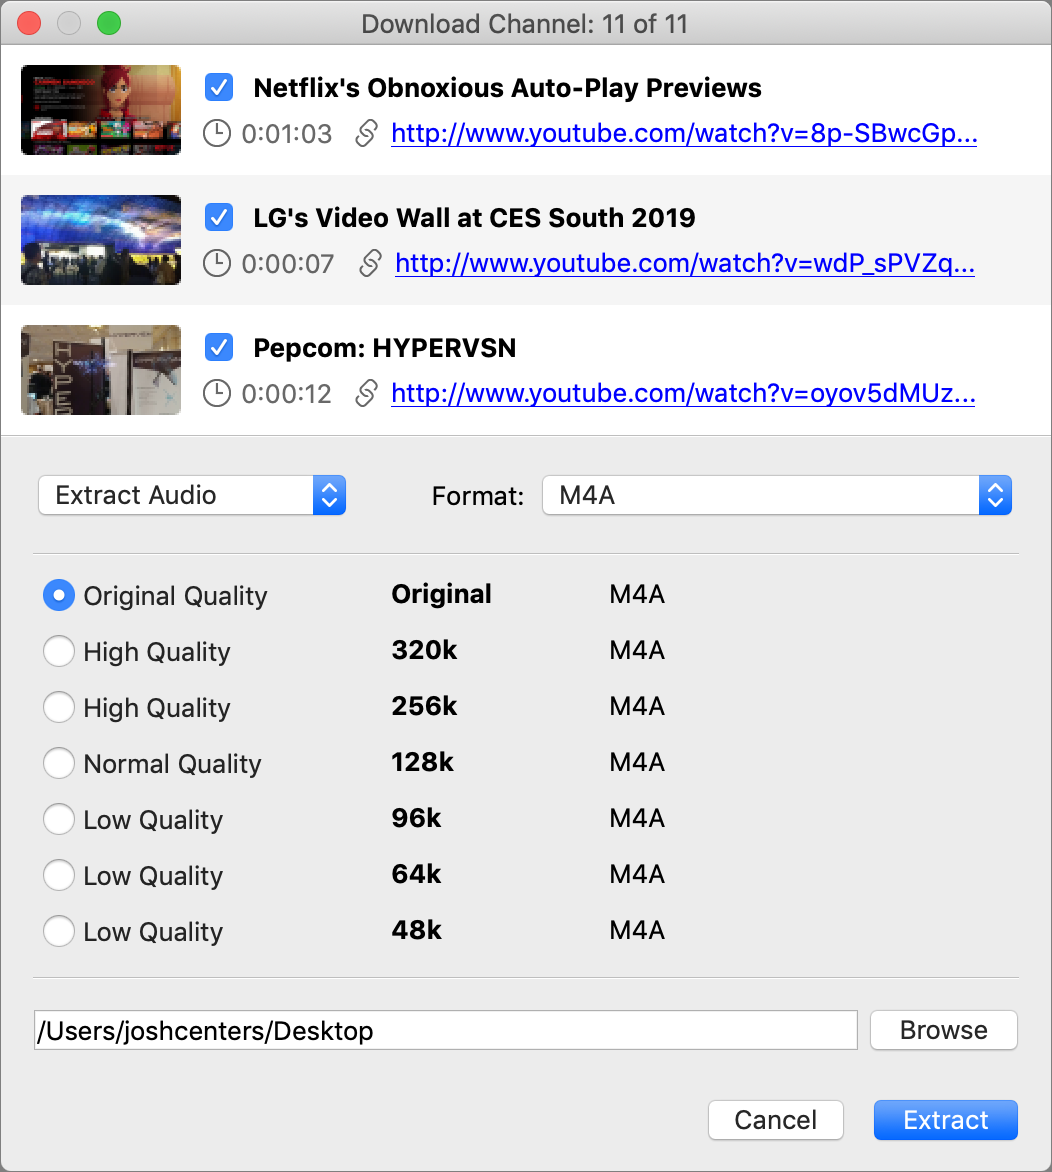 youtube downloaders for mac